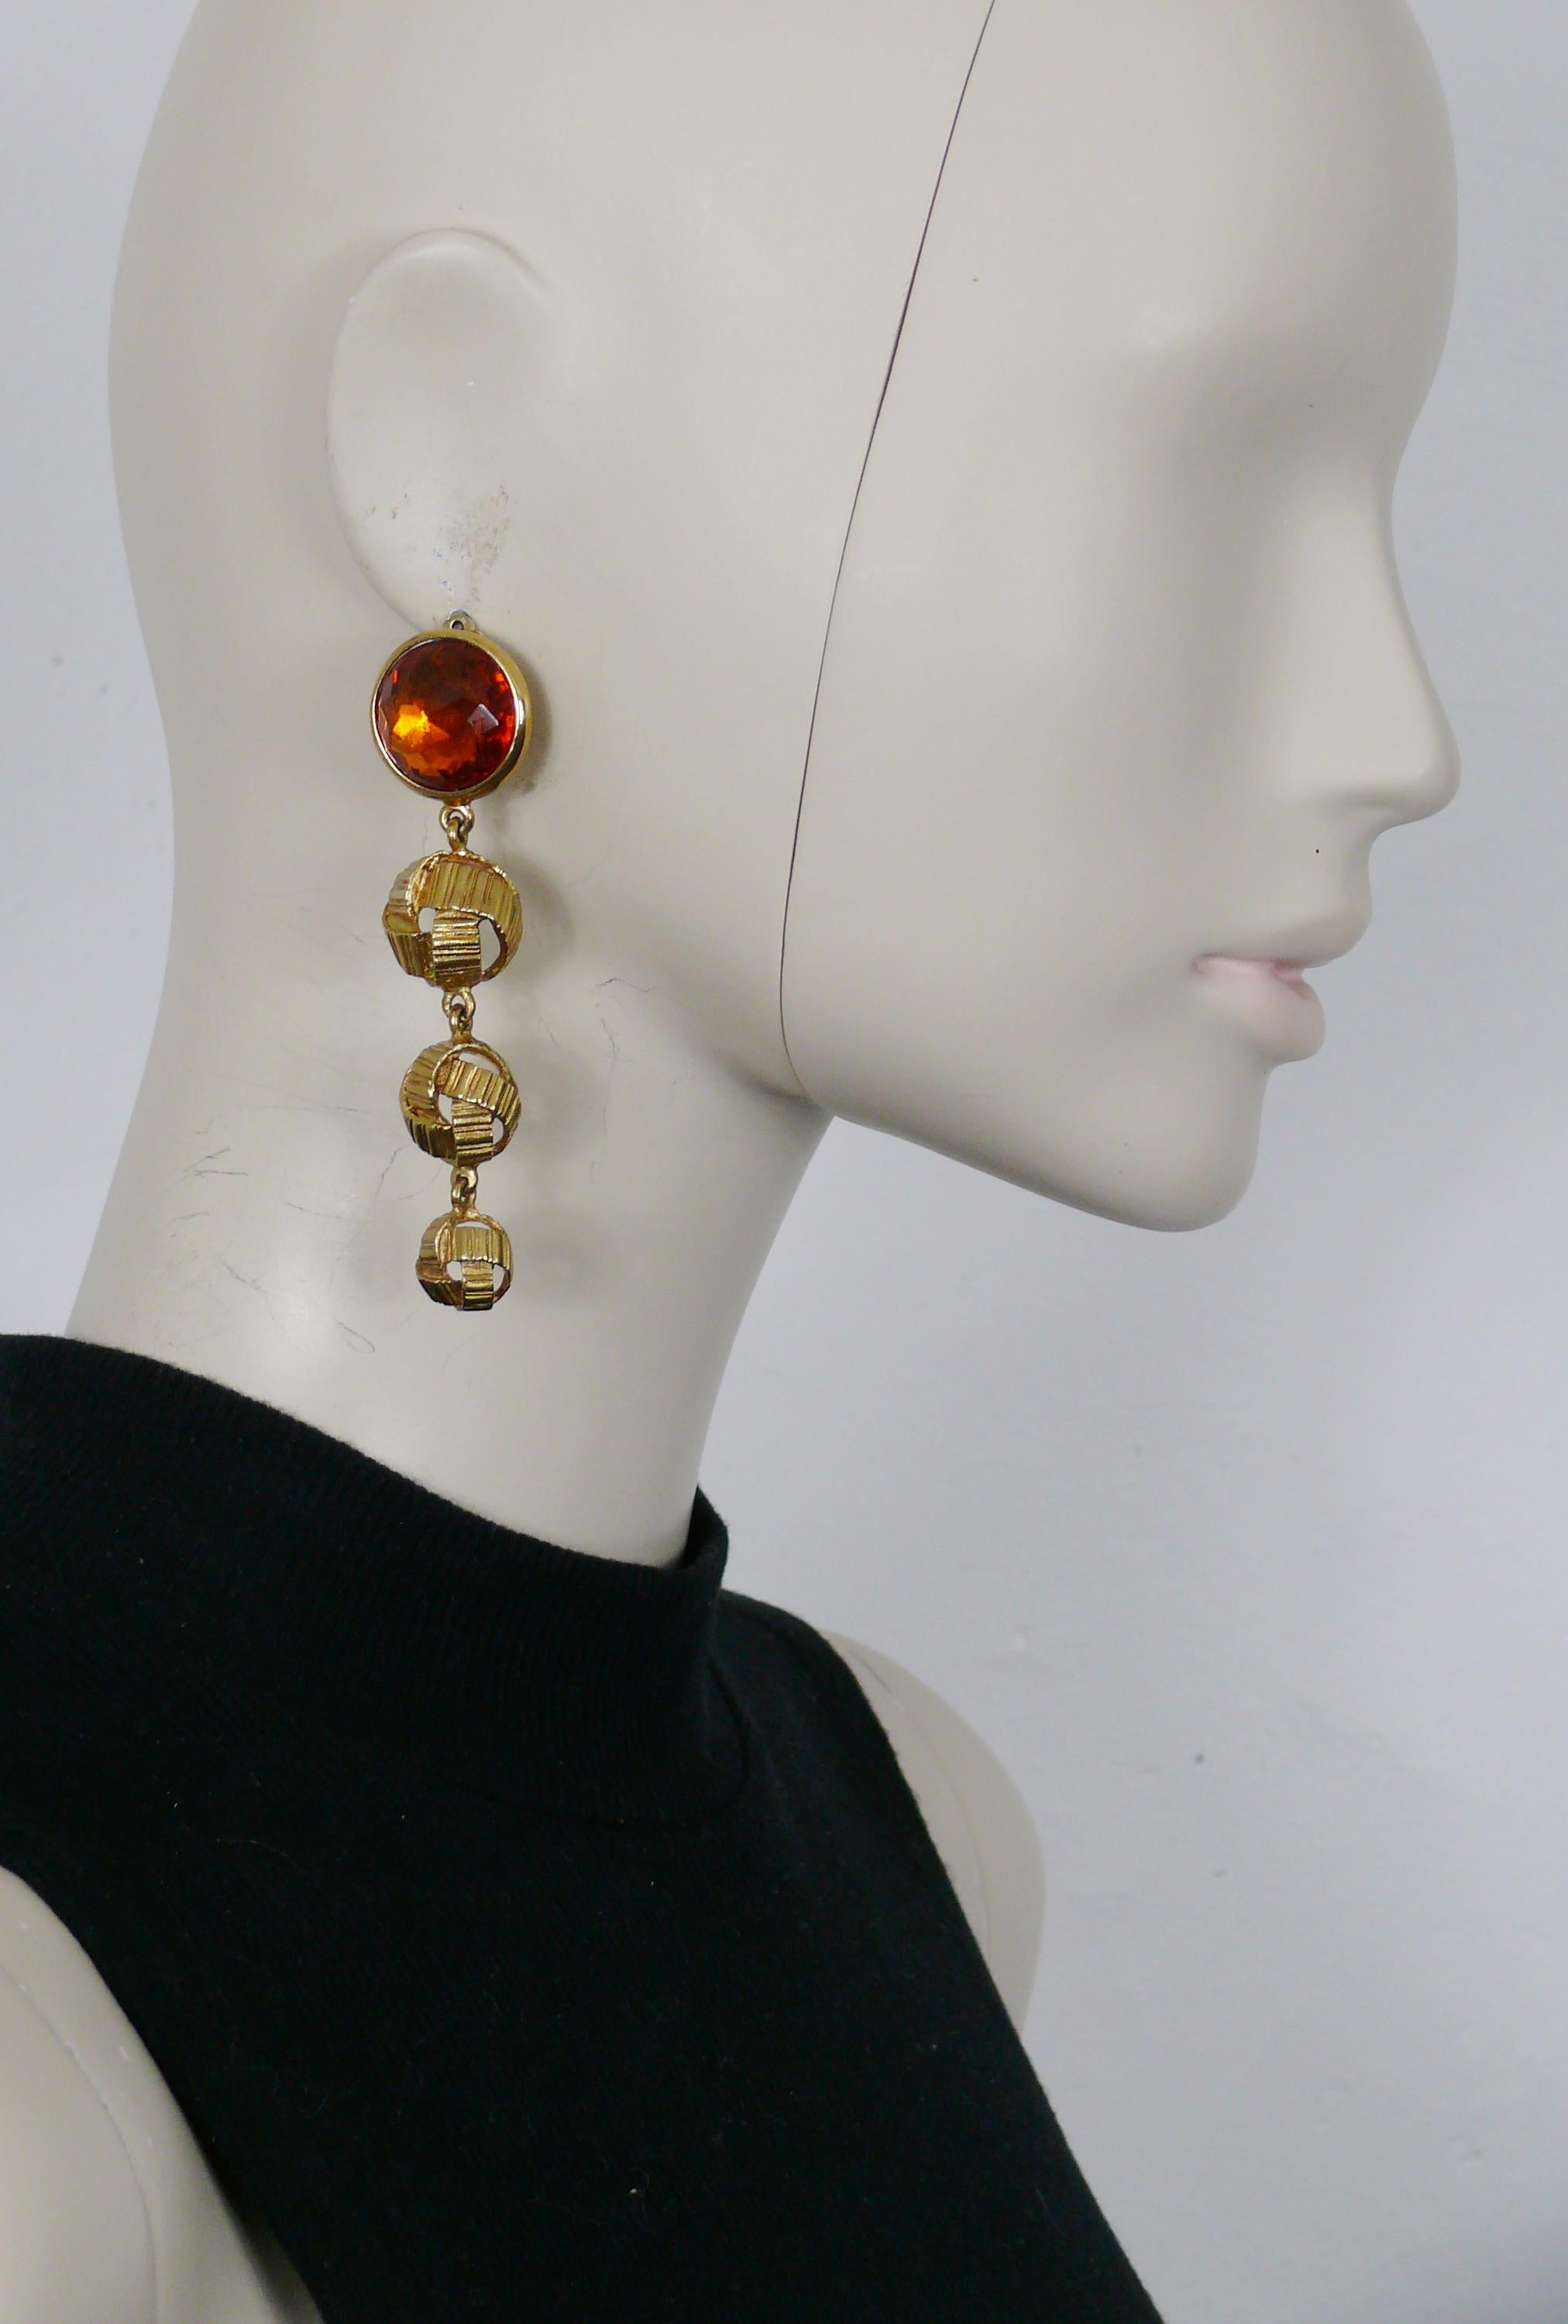 YVES SAINT LAURENT vintage gold toned dangling earrings (clip-on) featuring 3 ribbed textured ribbon-like balls topped by a large faceted orange resin crystal-like cabochon.

Embossed YSL Made in France.

Indicative measurements : height approx. 8.8